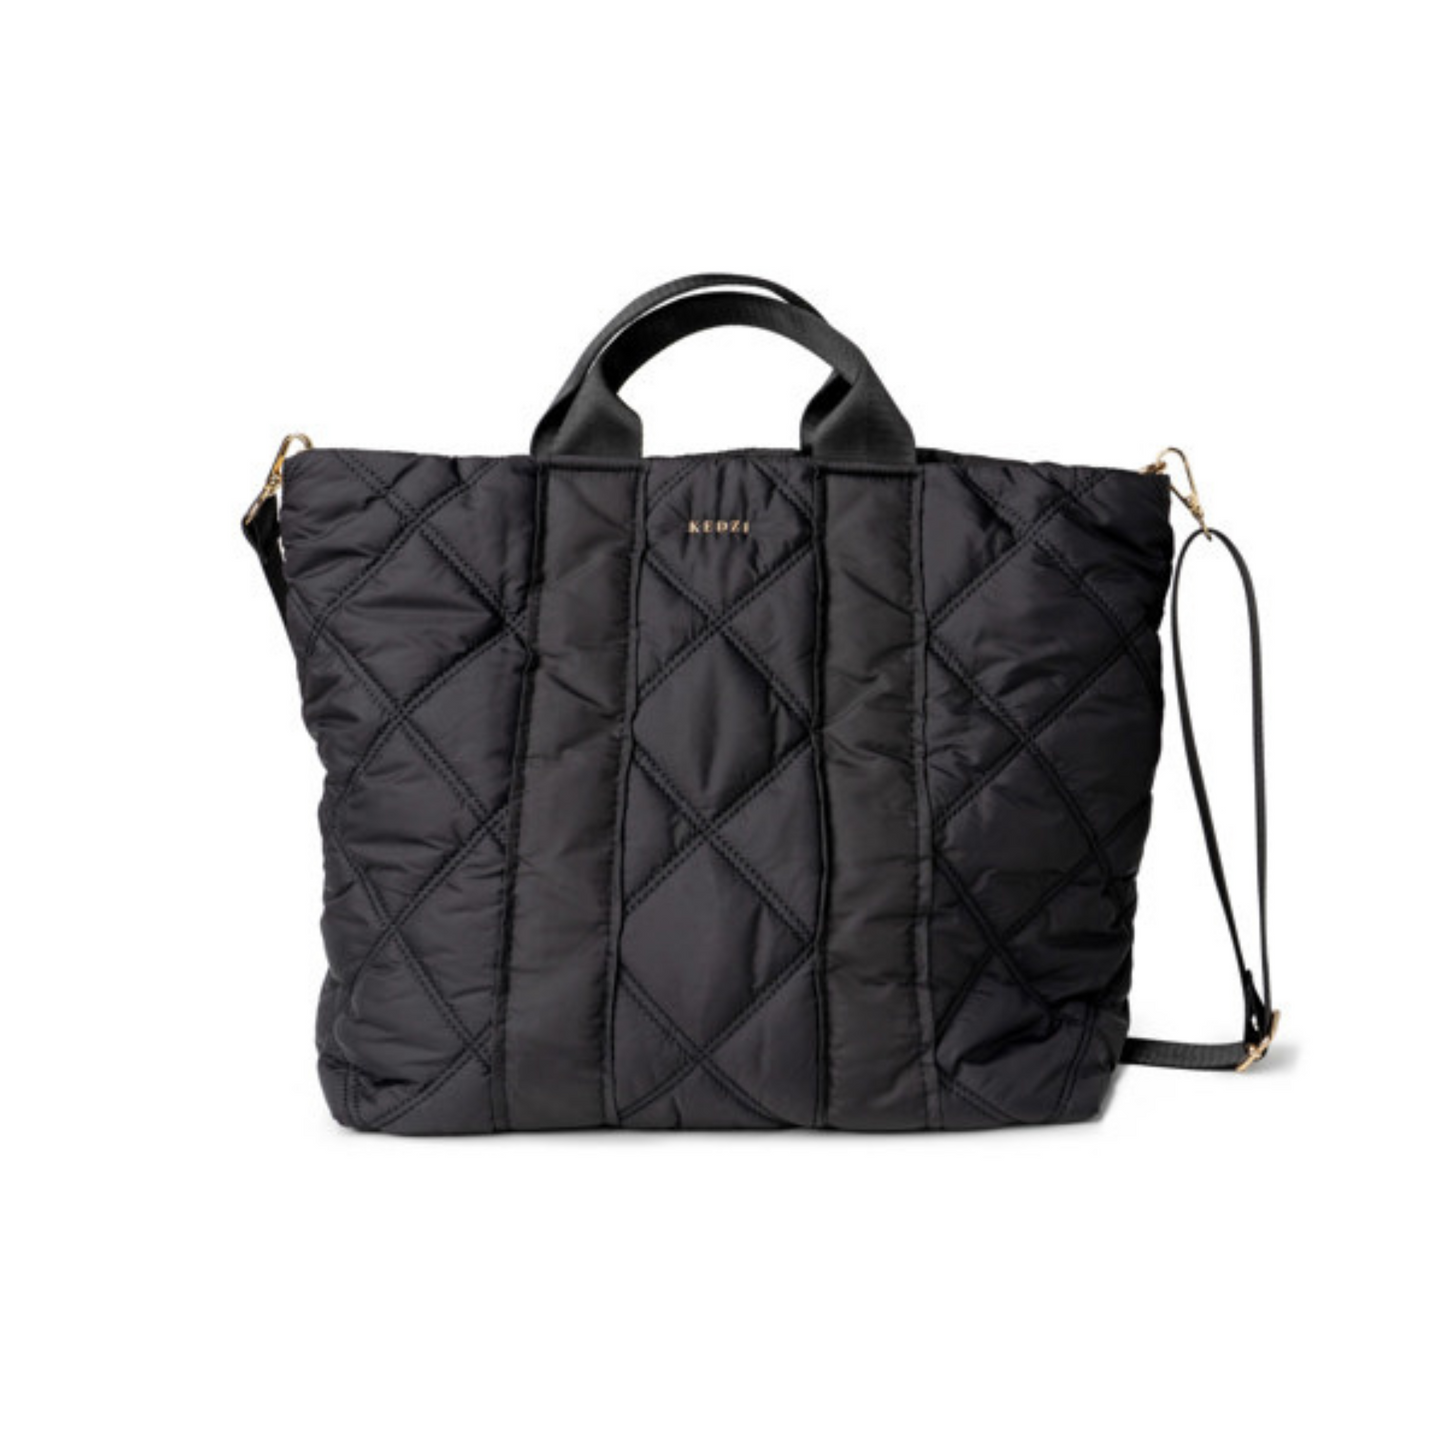 Black cloud nine tote from Kedzie. Perfect for travel, or everyday use!